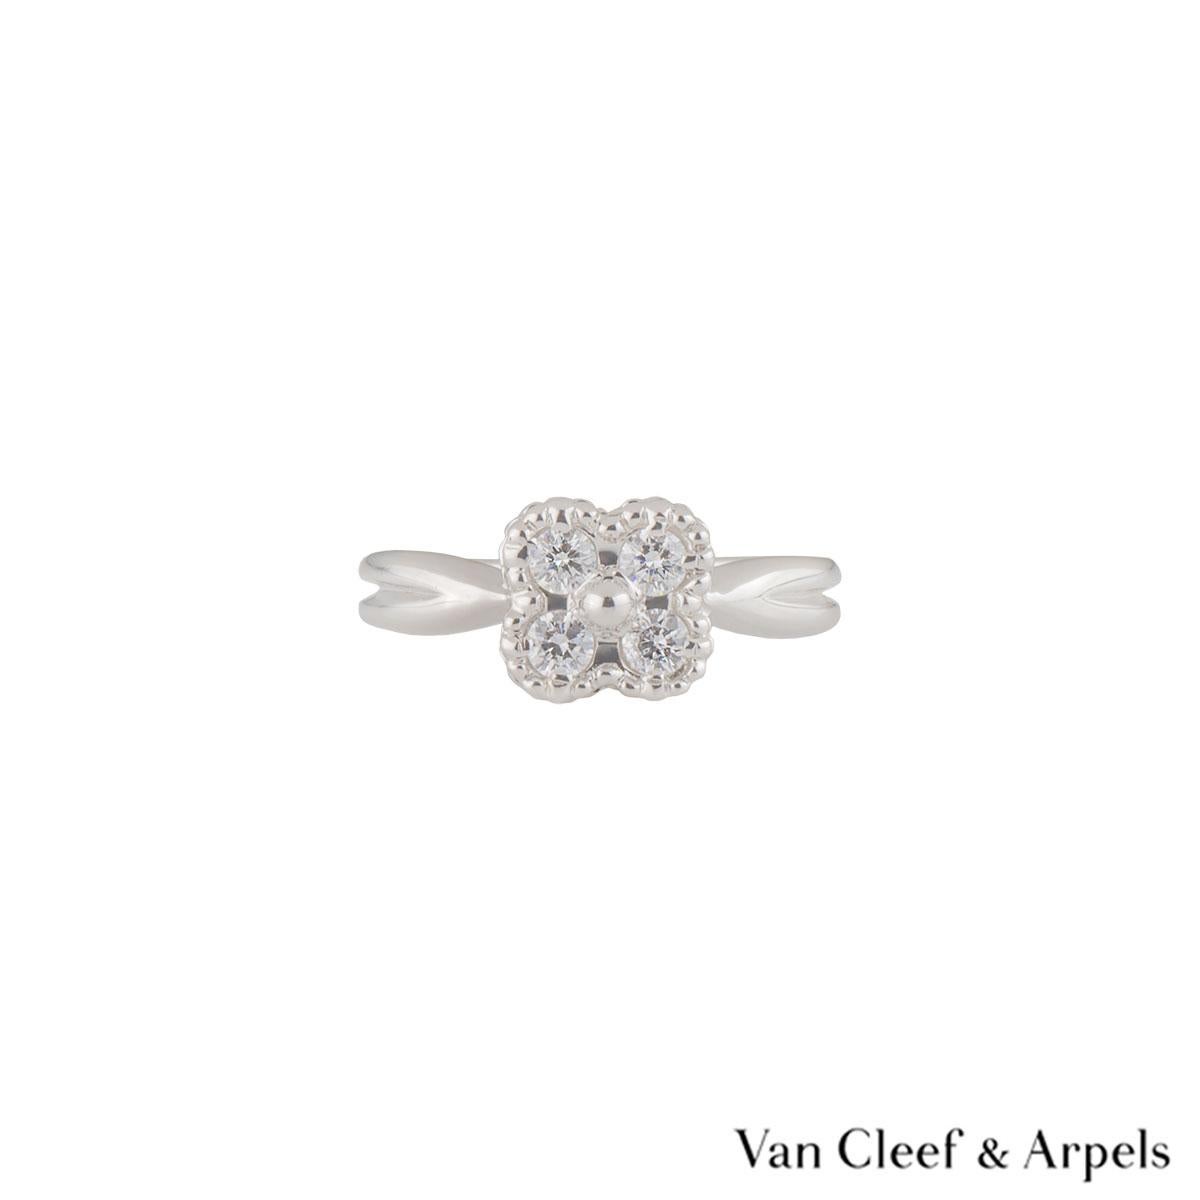 A lovely 18k white gold Van Cleef & Arpels diamond ring from the Alhambra collection. The central flower motif is set with 4 round round brilliant cut diamonds in a pave setting weighing approximately 0.28ct, G colour and VS clarity. The ring is